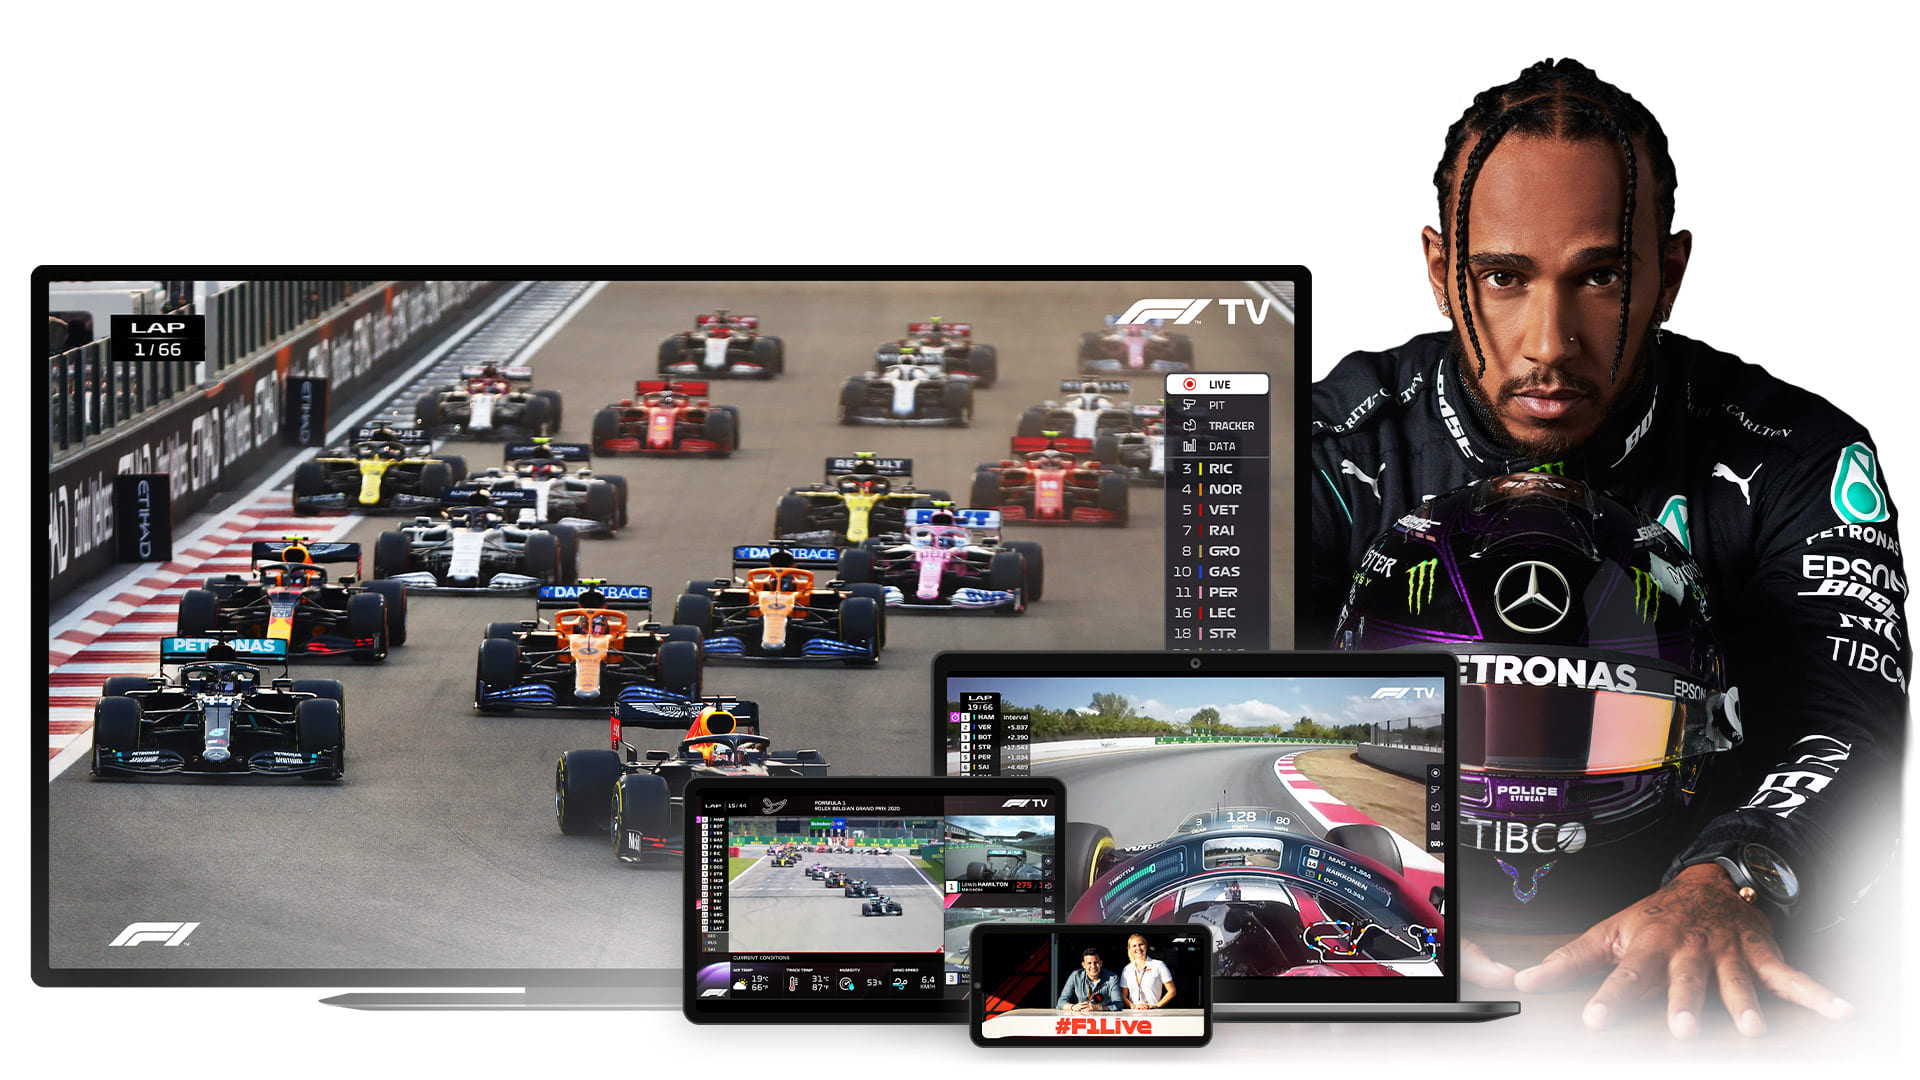 F1 TV Pro now available in India with no rights deal in place